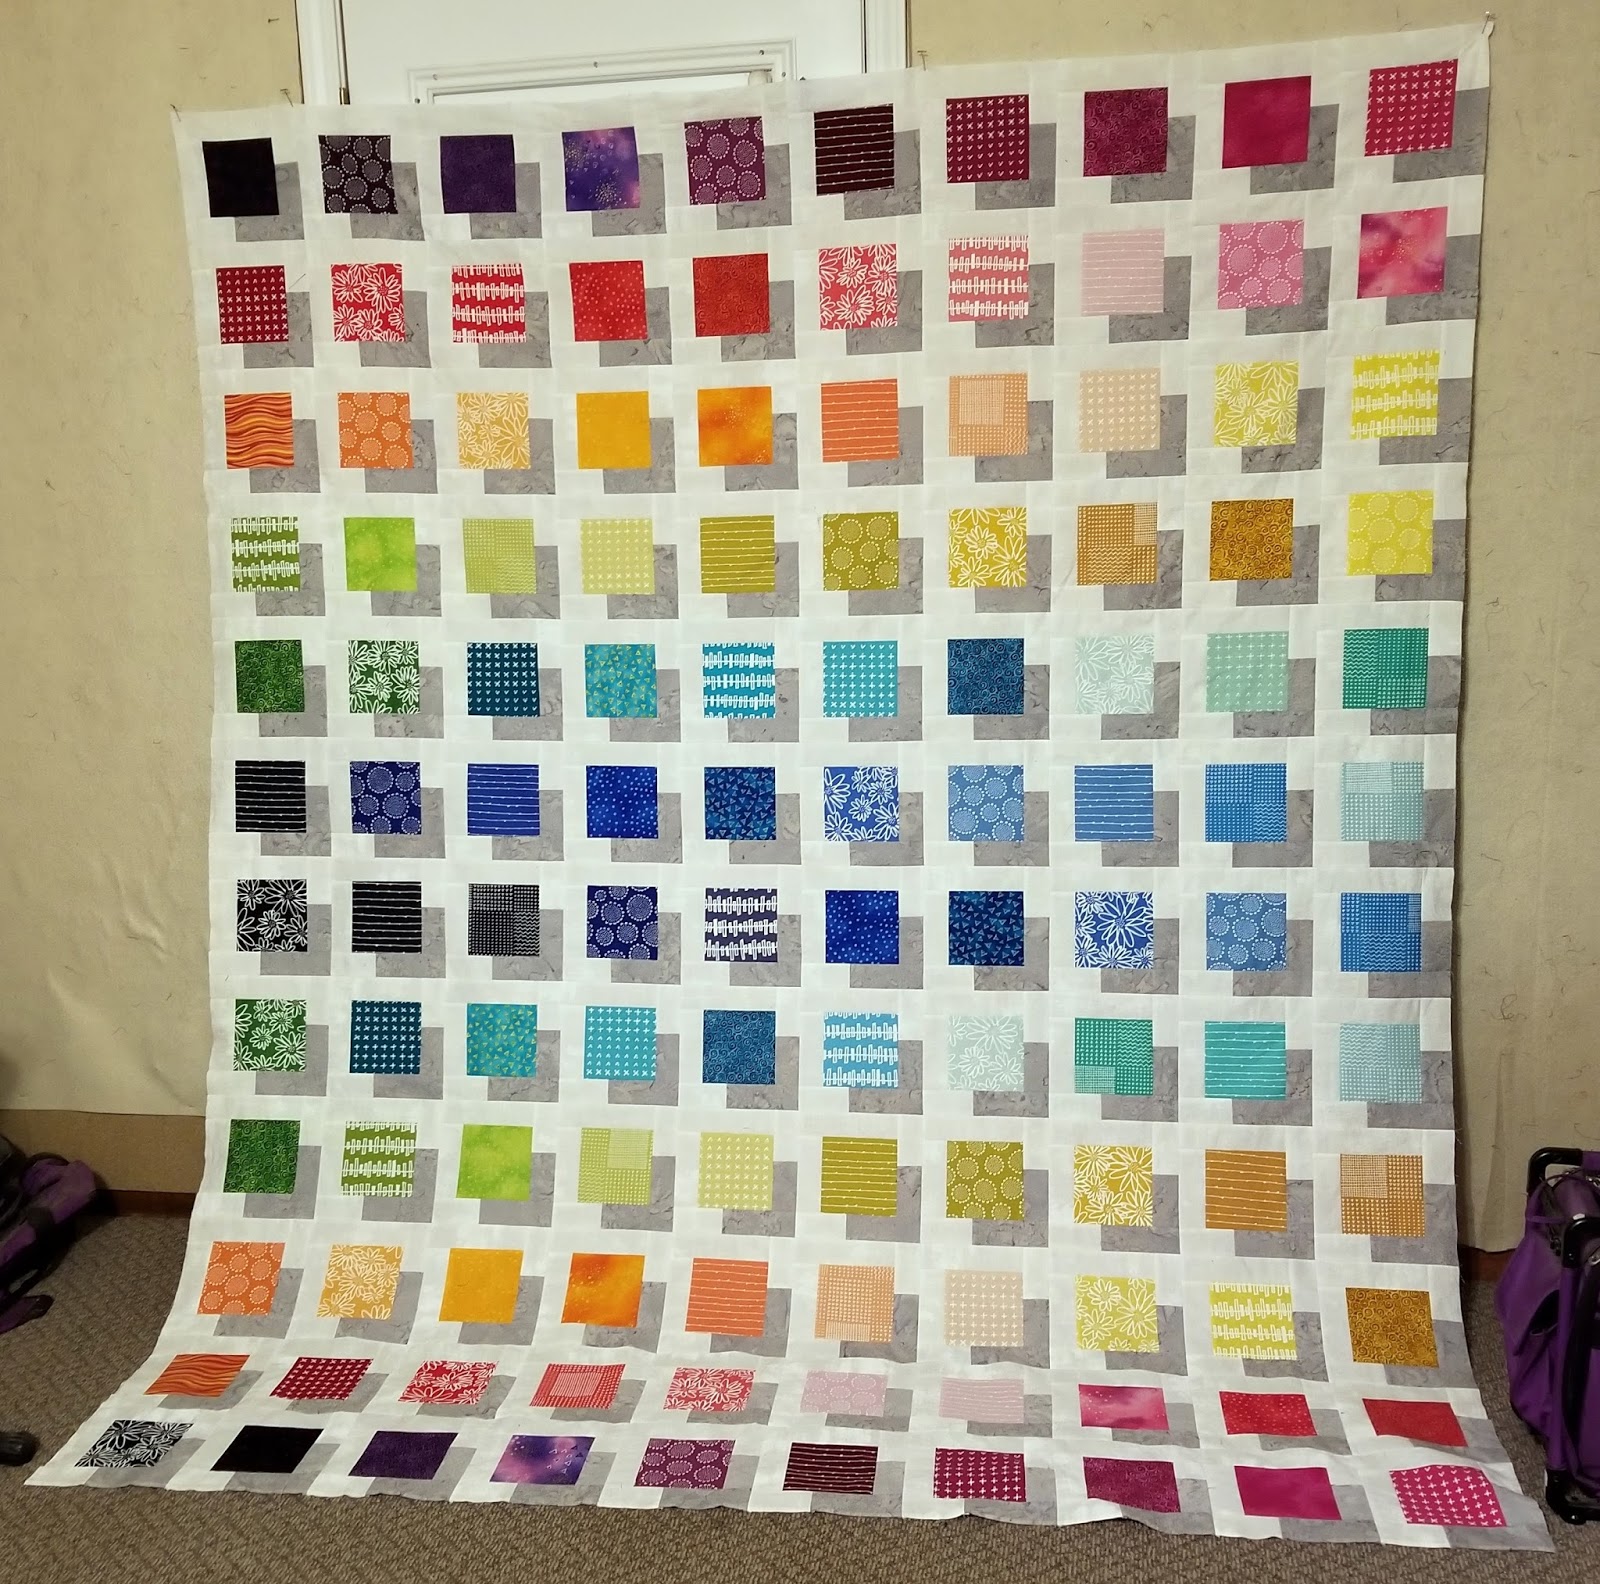 Confessions of a Serial Quilter